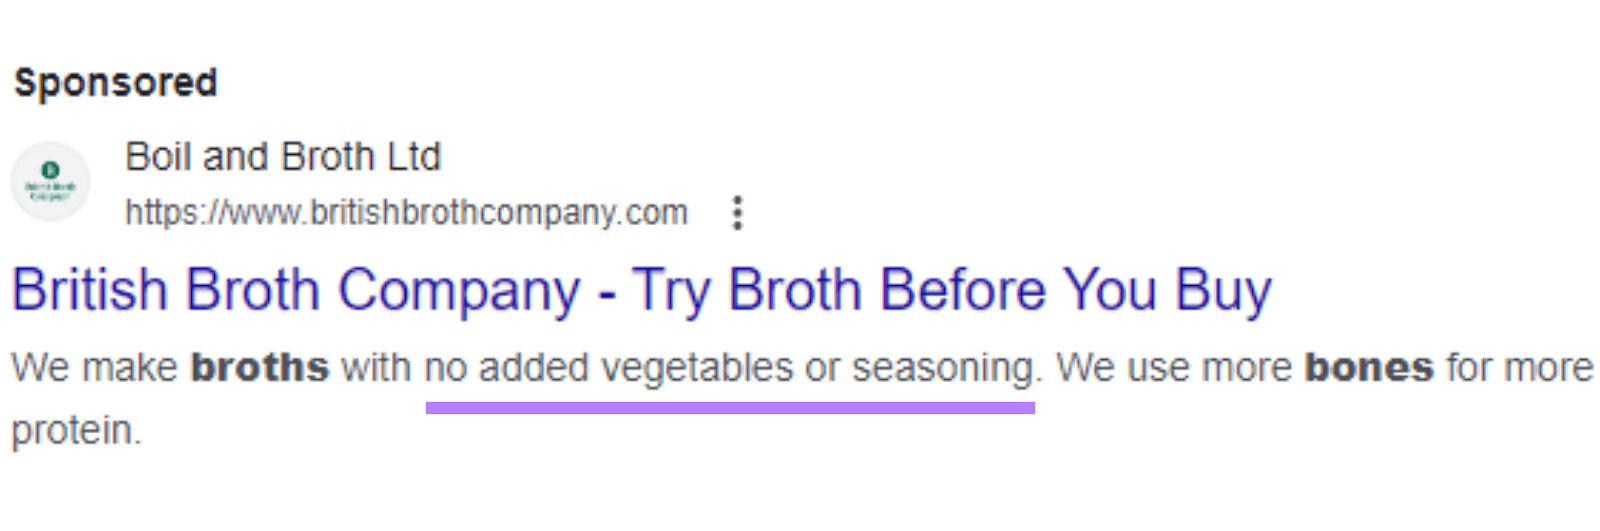 “no added vegetables or seasoning" highlighted in Boil and Broth's search ad